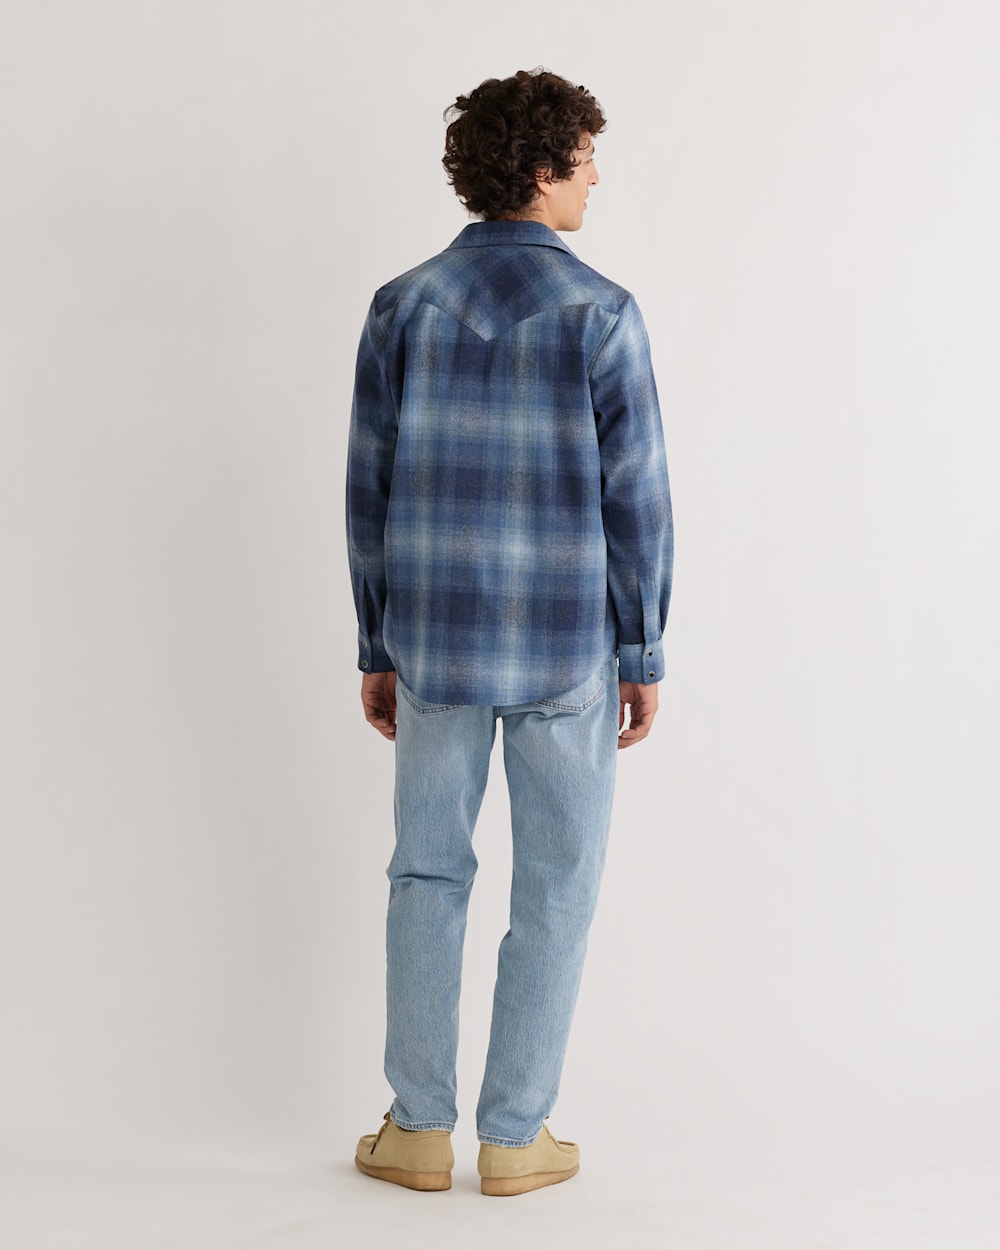 ALTERNATE VIEW OF MEN'S PLAID SNAP-FRONT WESTERN CANYON SHIRT IN NAVY MIX OMBRE image number 3